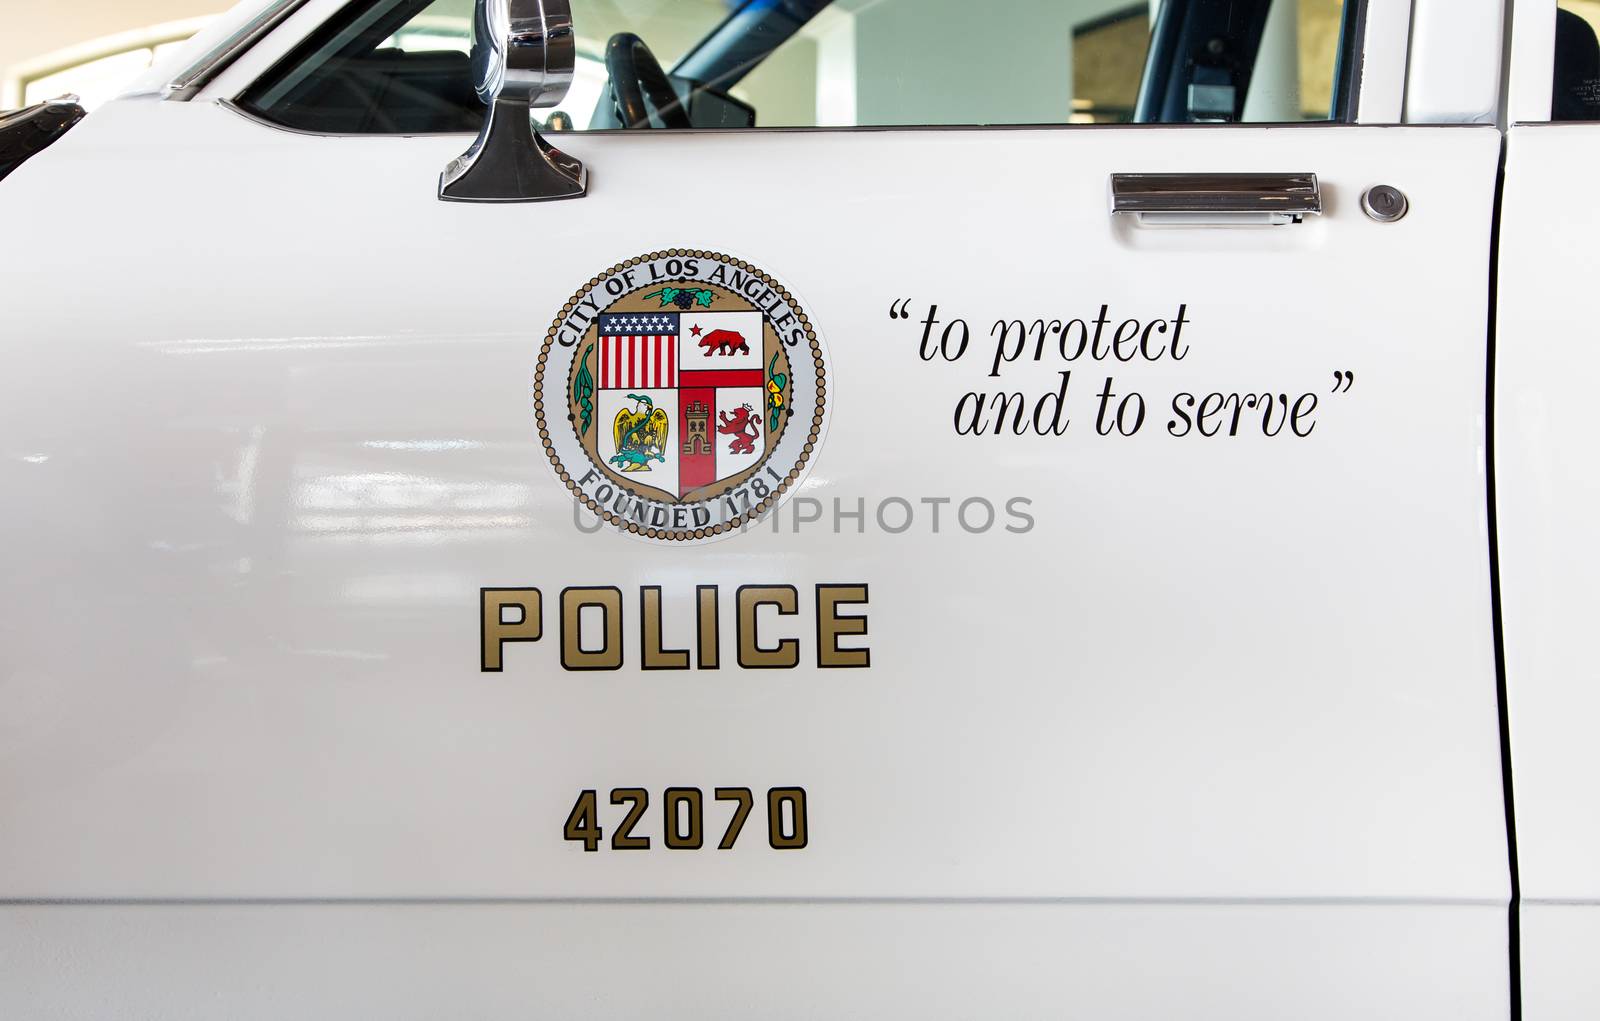 SIMI VALLEY, CA/USA - JANUARY 23, 2016: Los Angeles police department squad car logo and emblem.